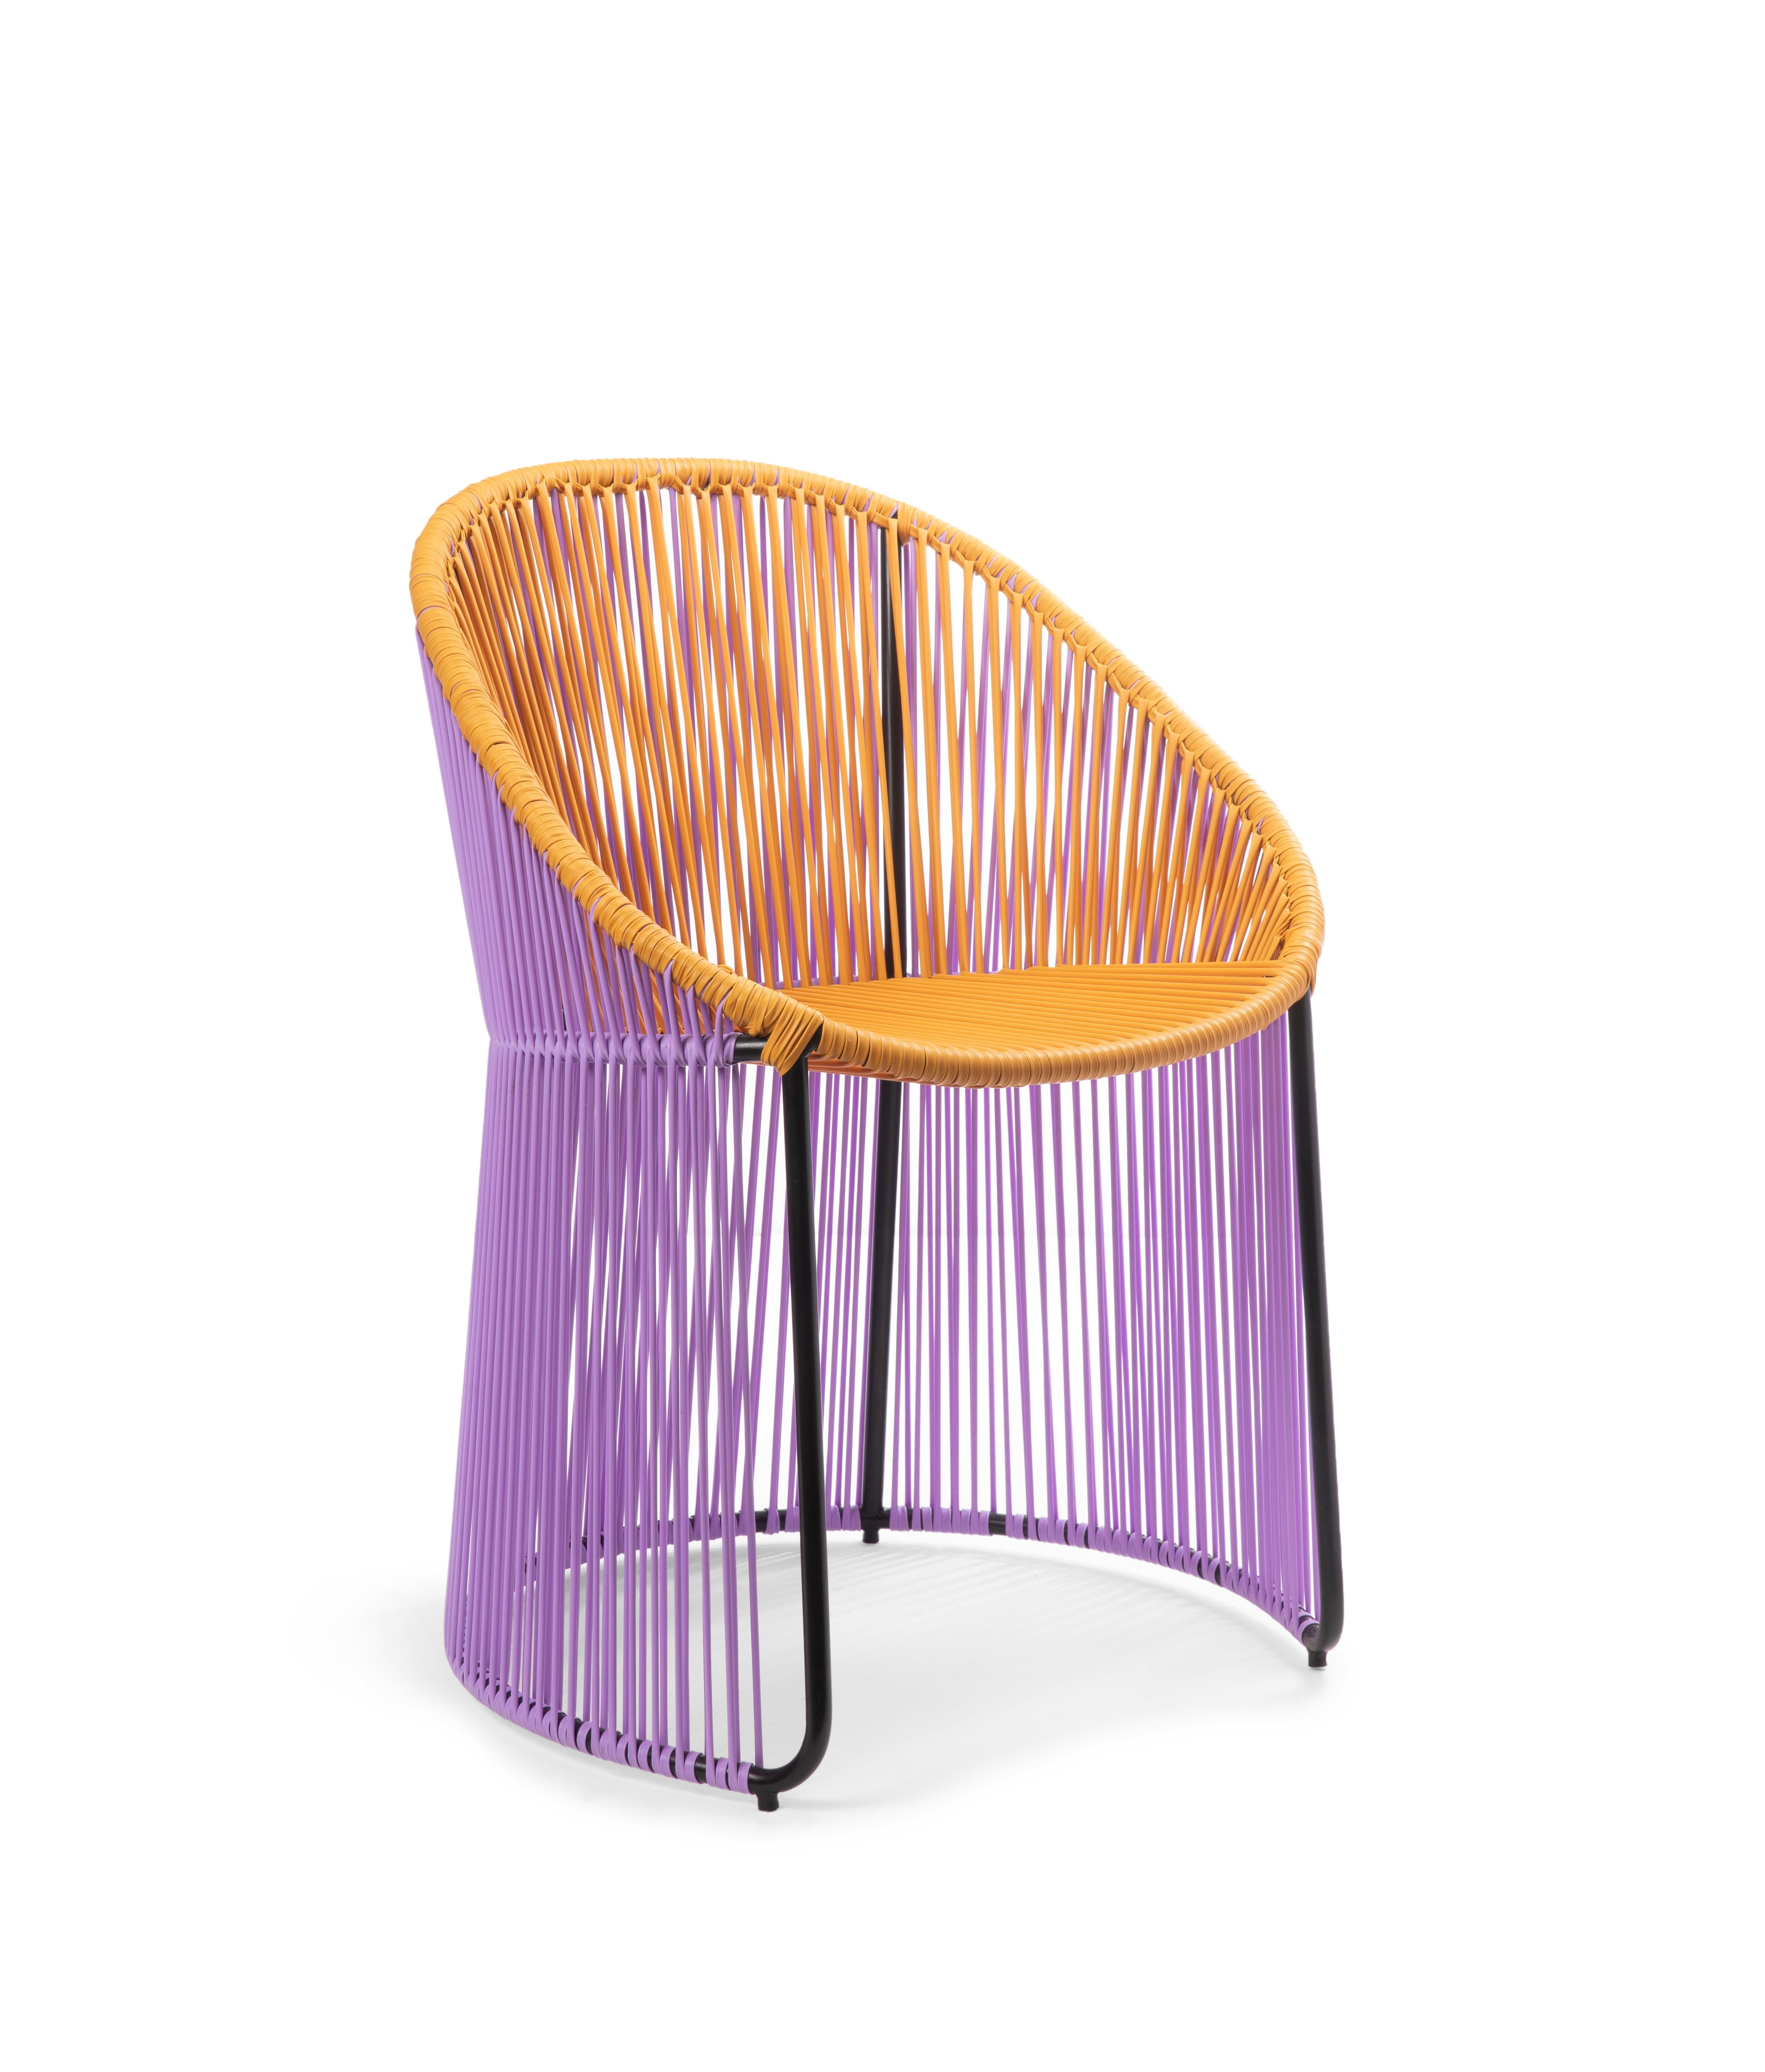 Set of 2 Honey/Lila Cartagenas dining chair by Sebastian Herkner.
Materials: PVC strings. Galvanized and powder-coated tubular steel frame
Technique: made from recycled plastic. Weaved by local craftspeople in Colombia. 
Dimensions: W 60.2 x D